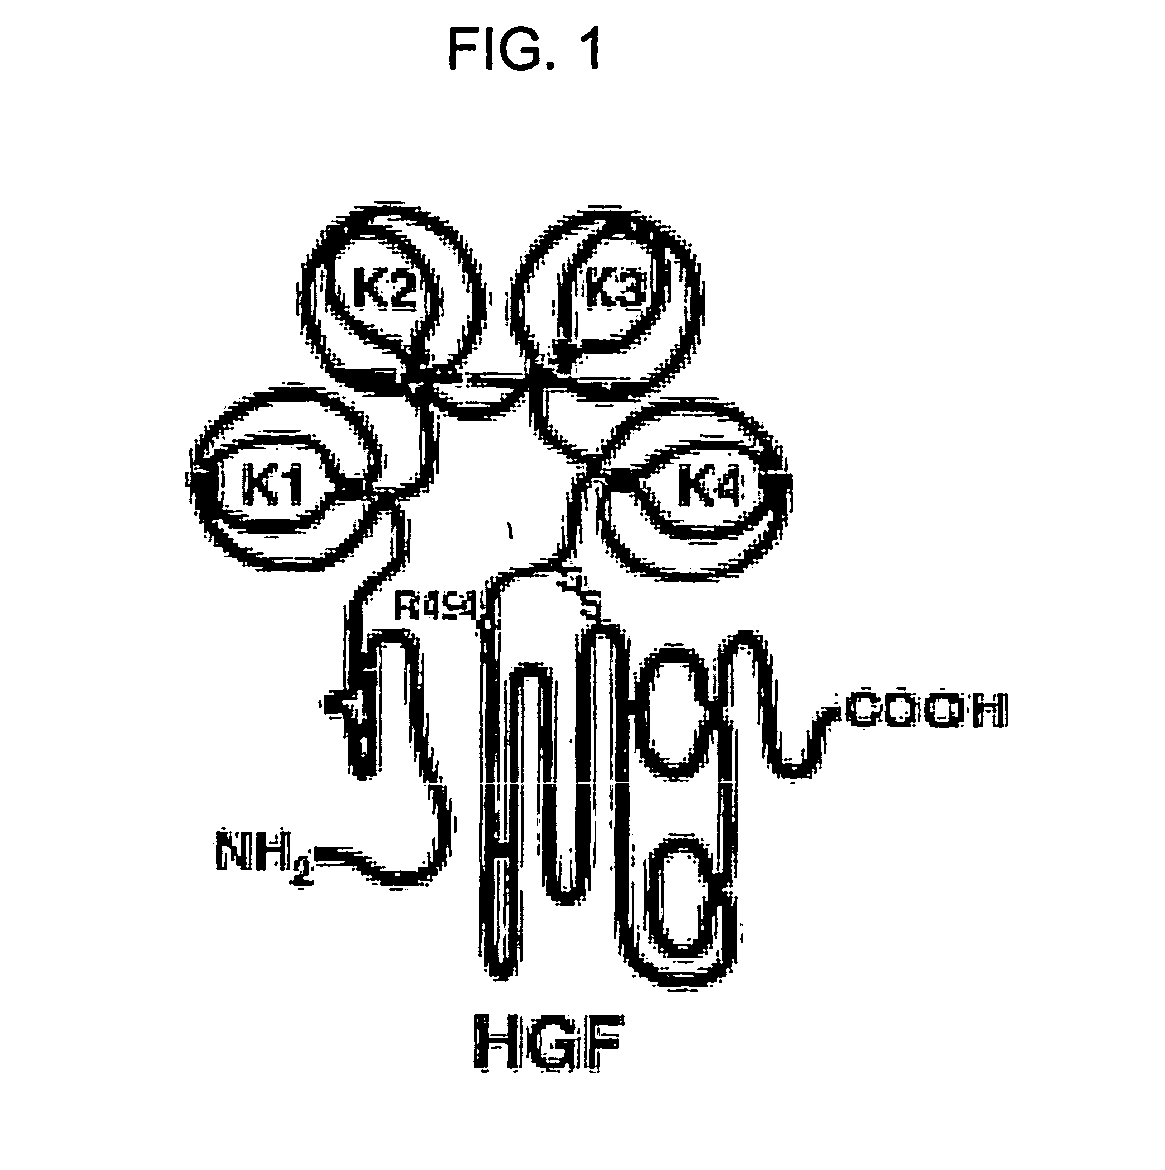 Neutralizable Epitope of HGF and Neutralizing Antibody Binding to the Same